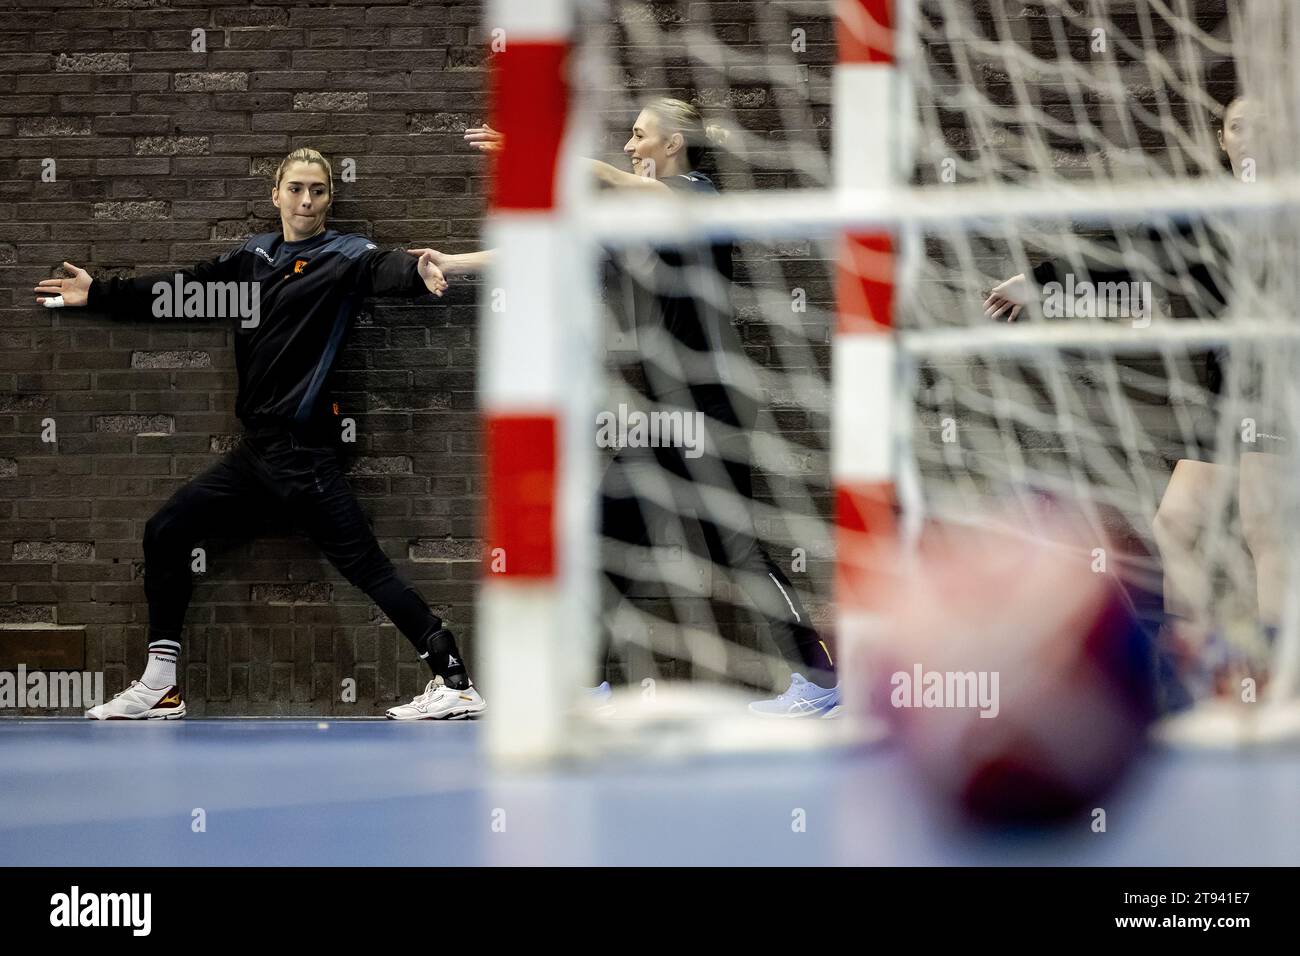 ARNHEM - Estavana Polman and Lois Abbingh during the training of the women's handball team for the World Cup. The World Cup is held in Denmark, Norway and Sweden. ANP ROBIN VAN LONKHUIJSEN Stock Photo